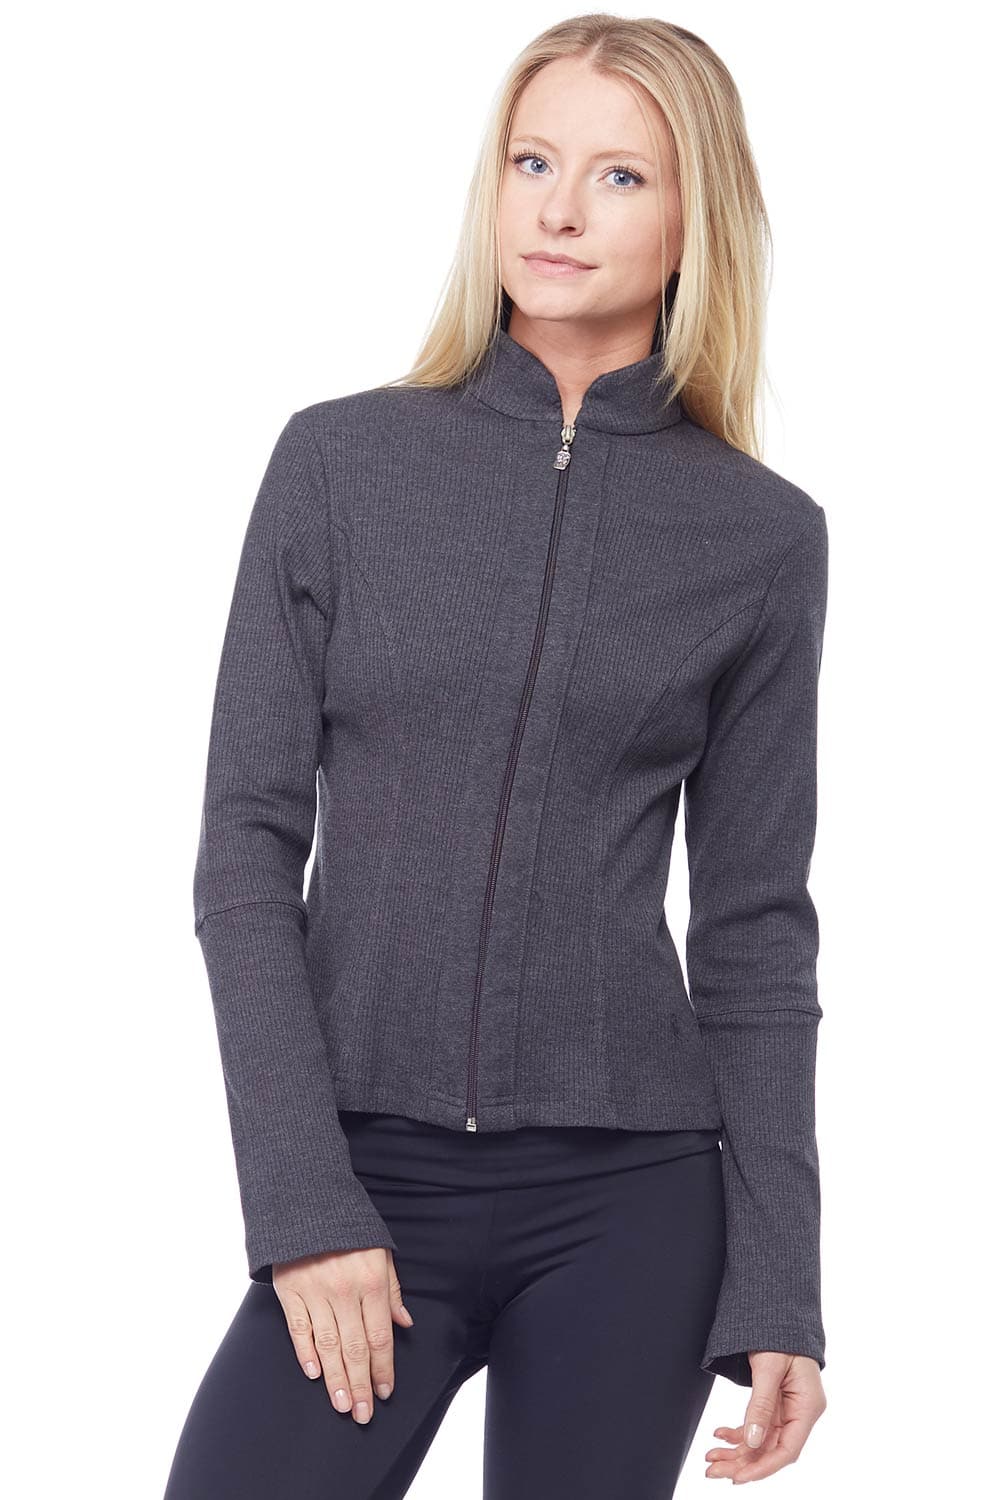 Sandra McCray Ribbed Fitted Jacket - Evolve Fit Wear